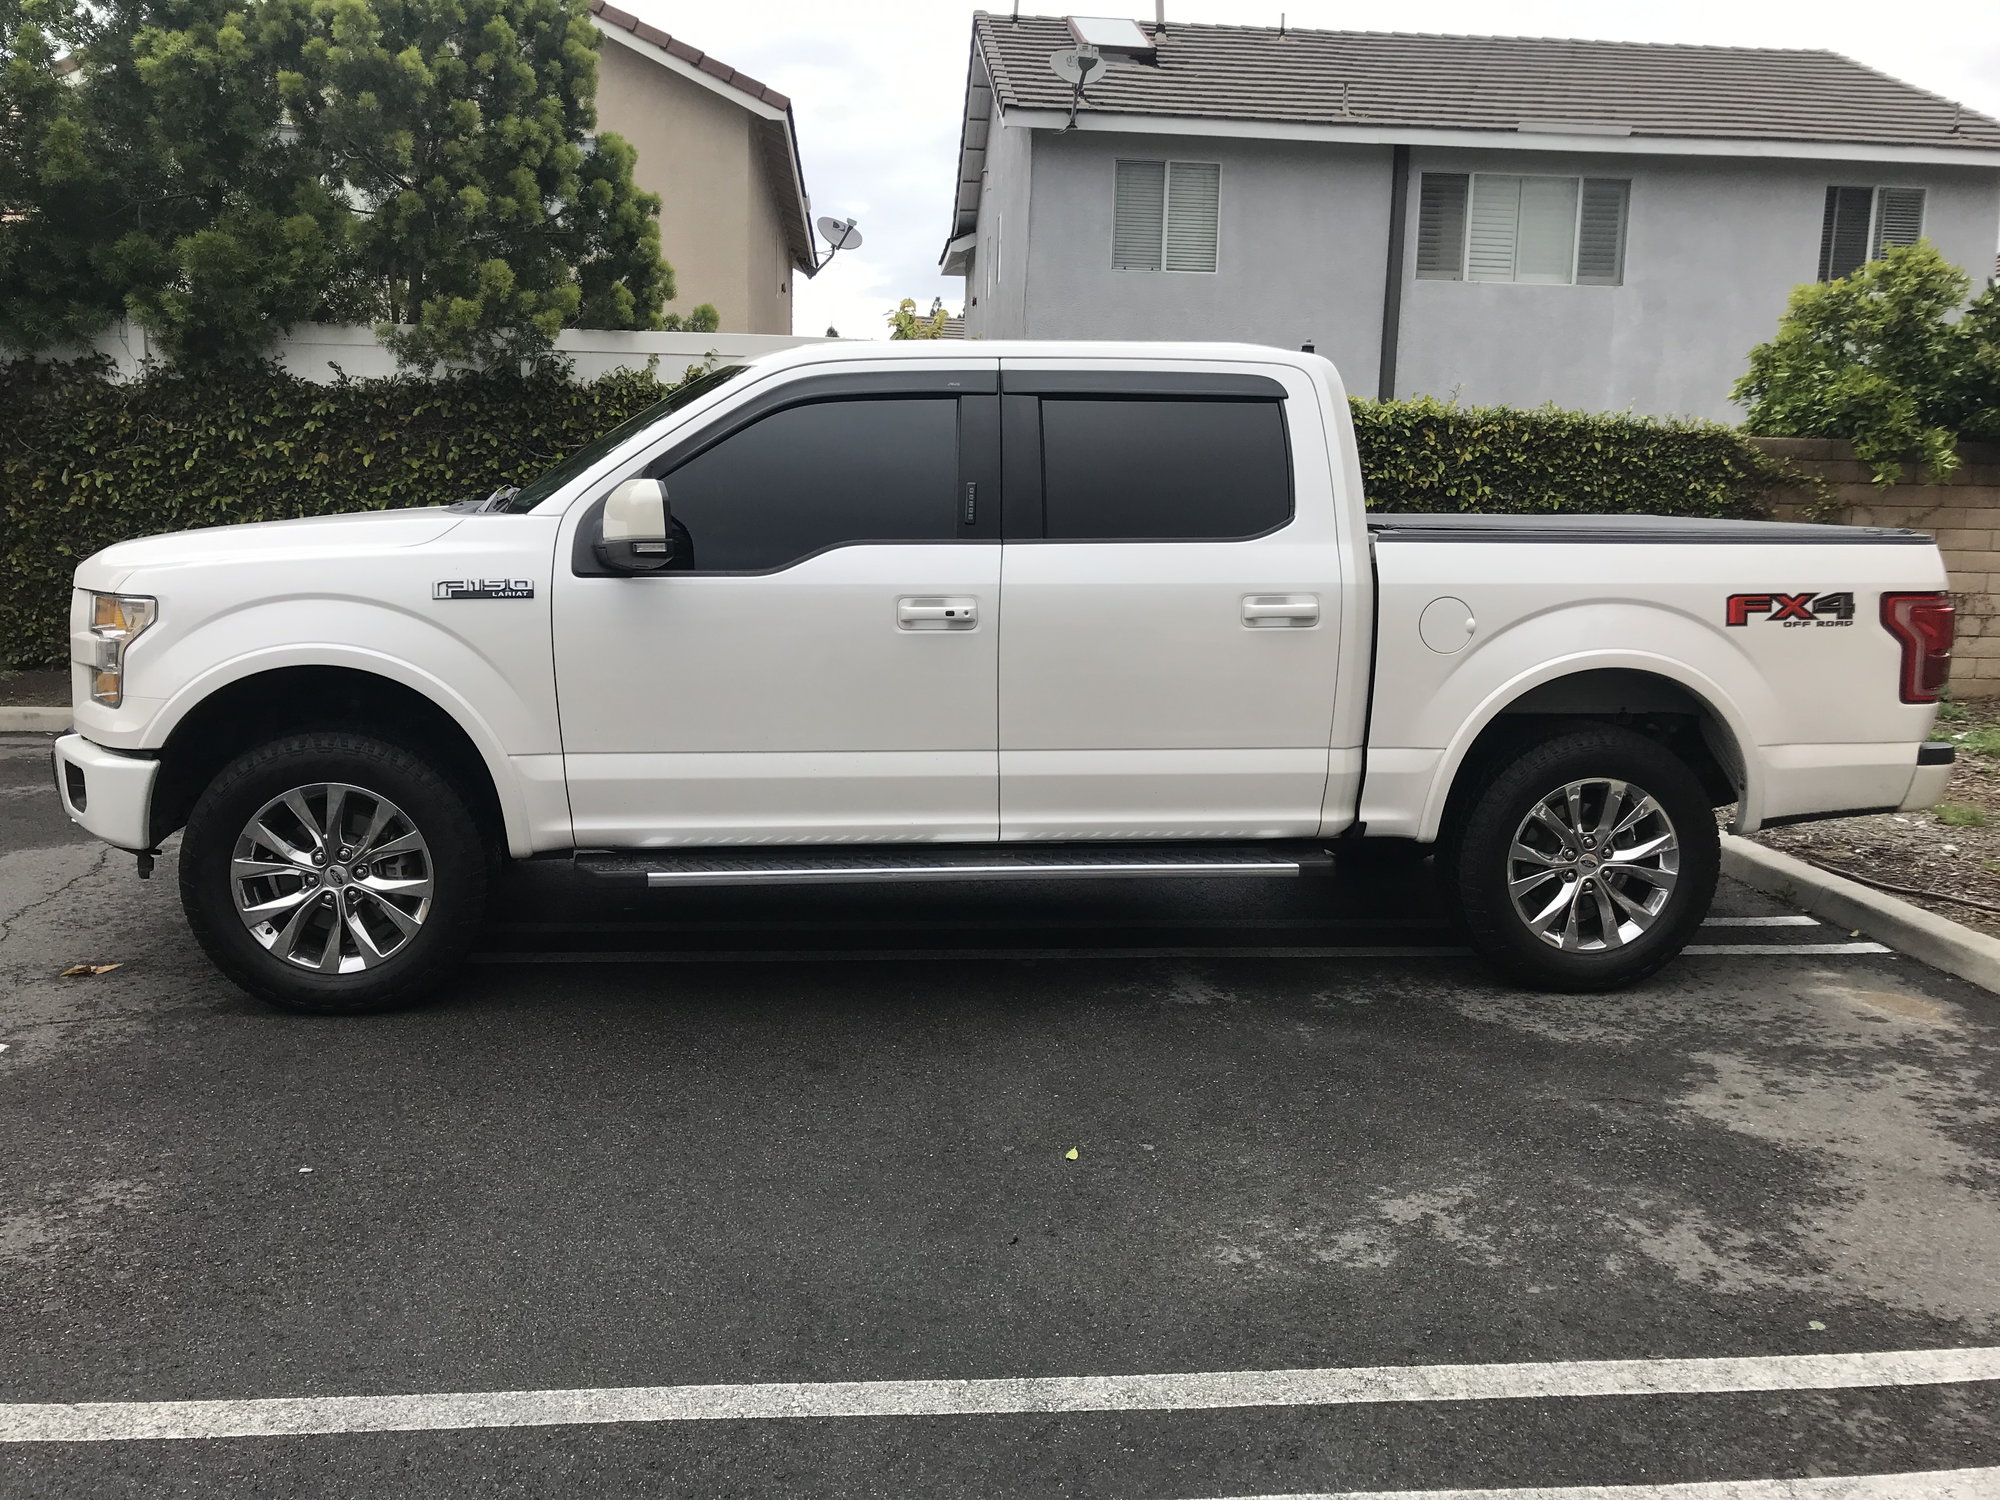 Show me your Leveled trucks with OEM rims! - Page 246 - Ford F150 Forum -  Community of Ford Truck Fans